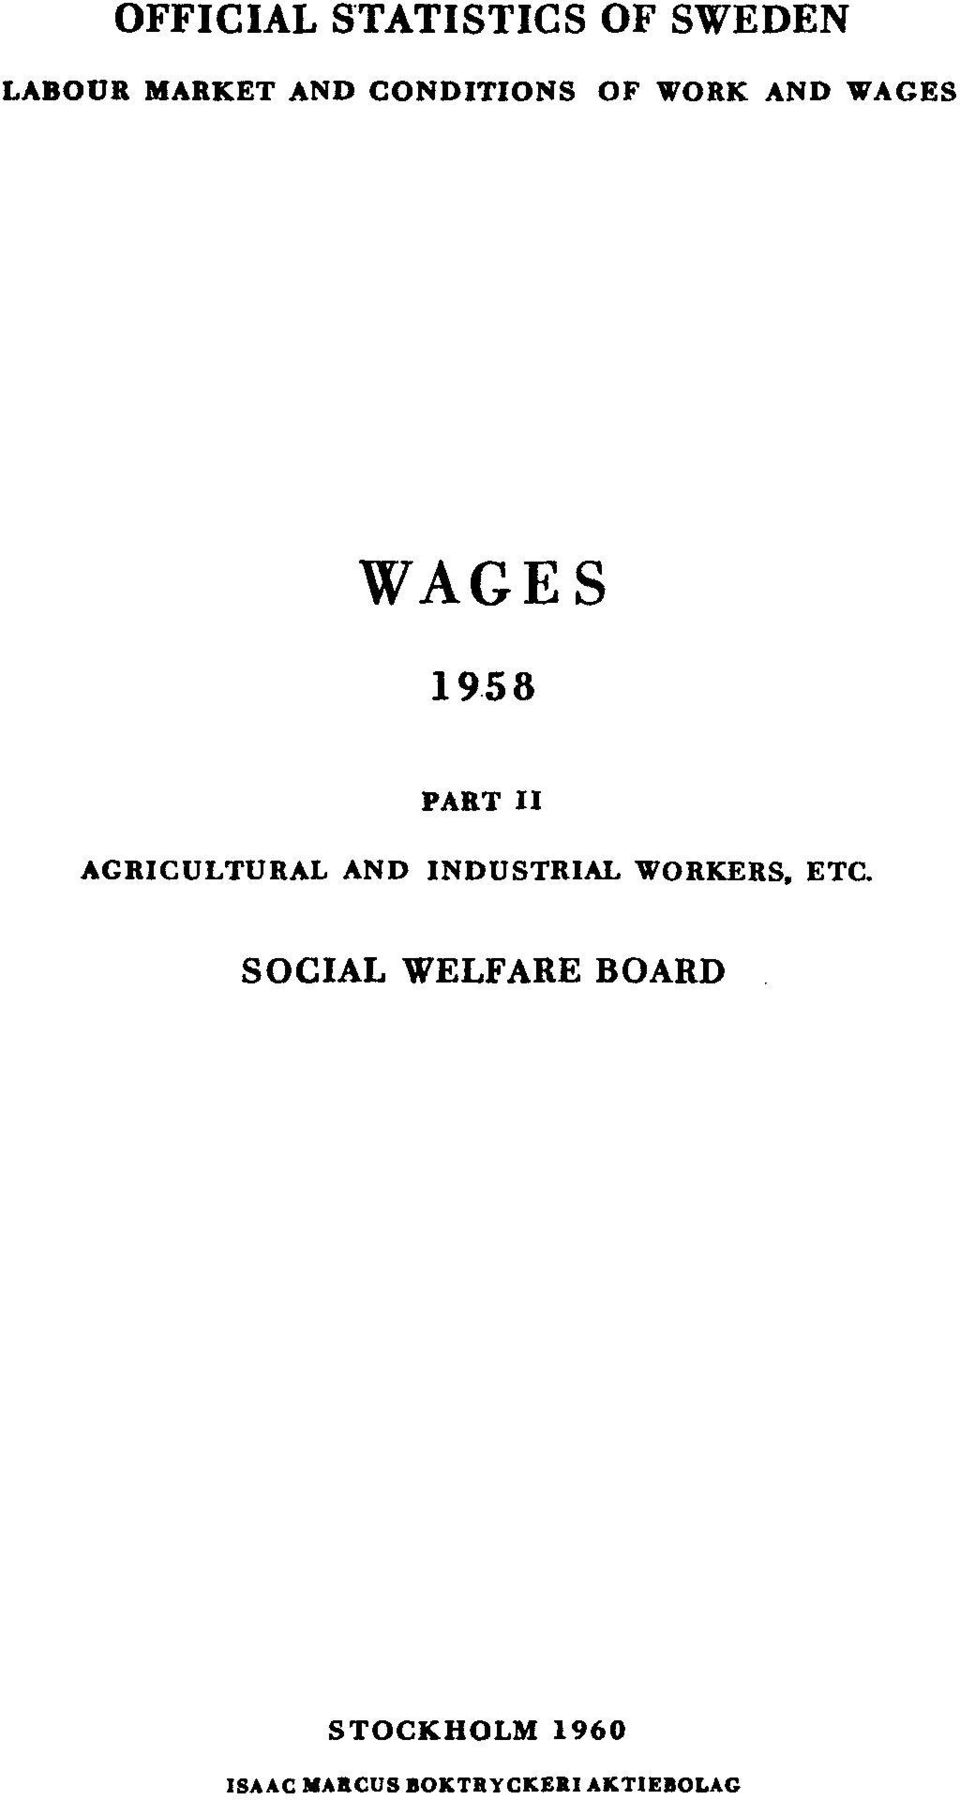 AGRICULTURAL AND INDUSTRIAL WORKERS, ETC.